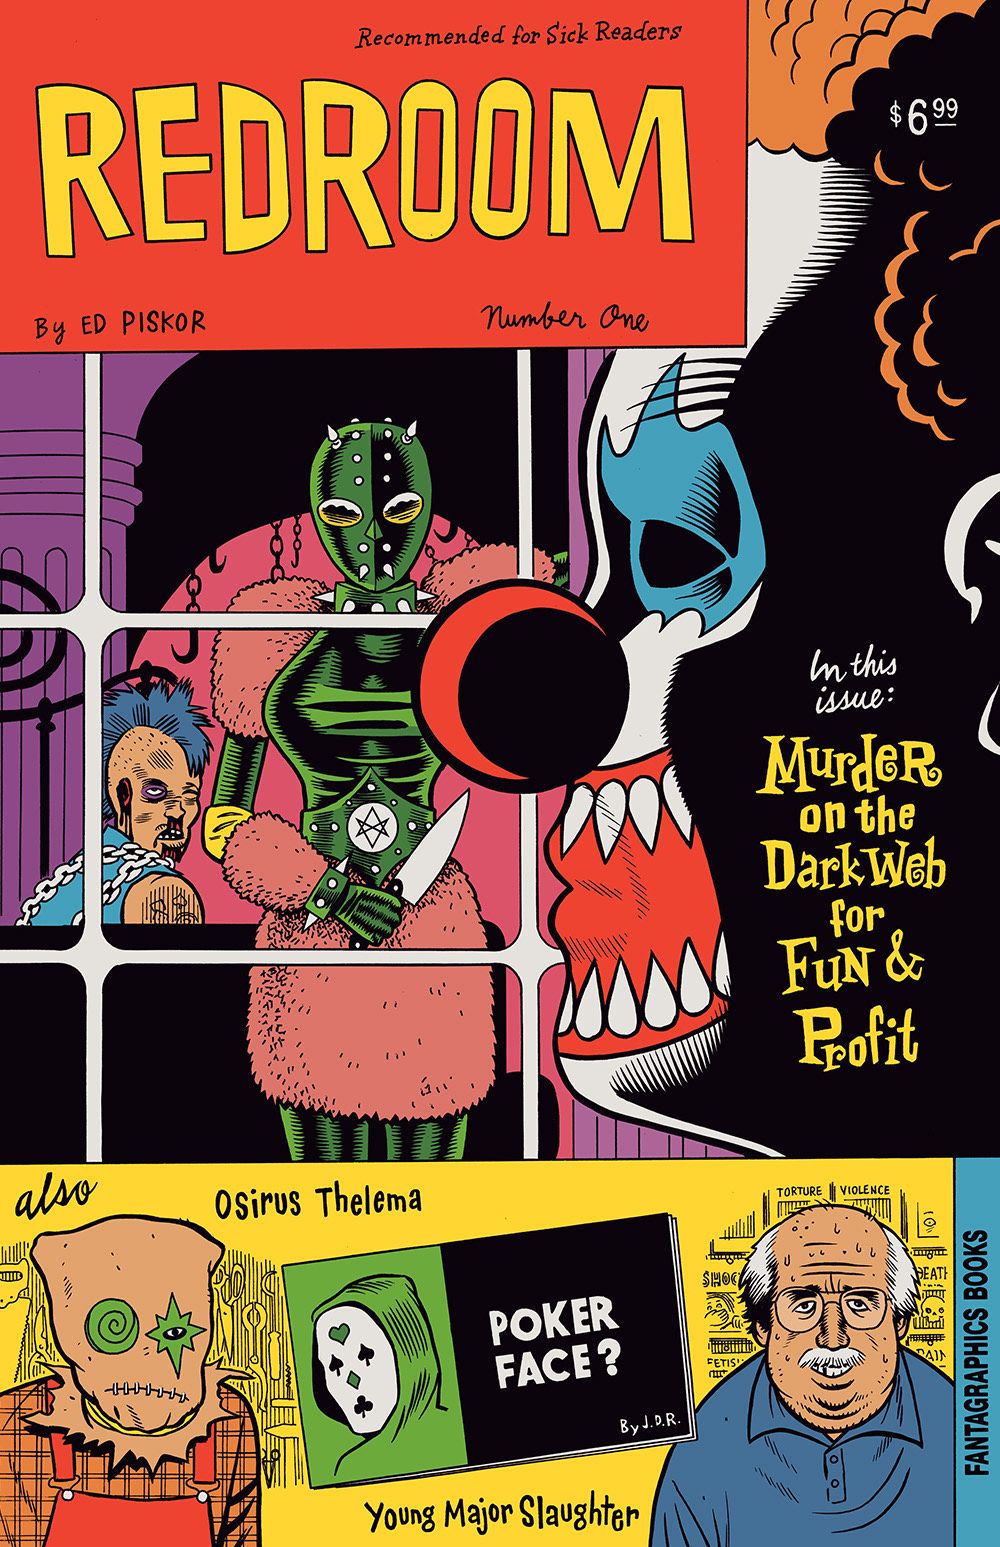 Red Rooms Ed Piskor Explores the Horrors of the Dark Webs Antisocial Network